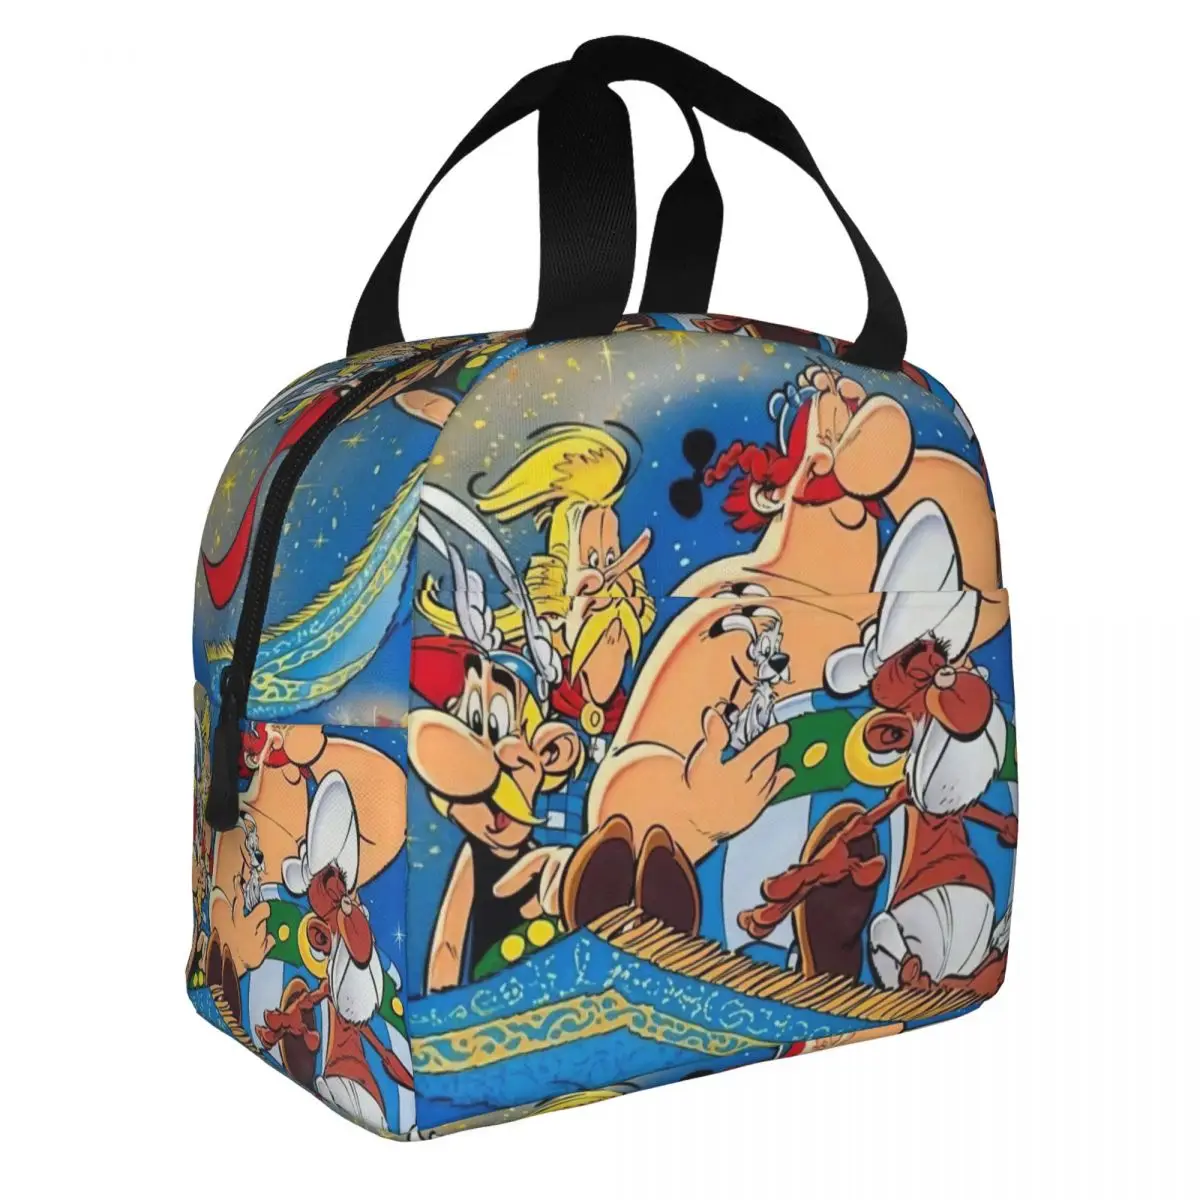 Asterix Obelix Lunch Bento Bags Portable Aluminum Foil thickened Thermal Cloth Lunch Bag for Women Men Boy